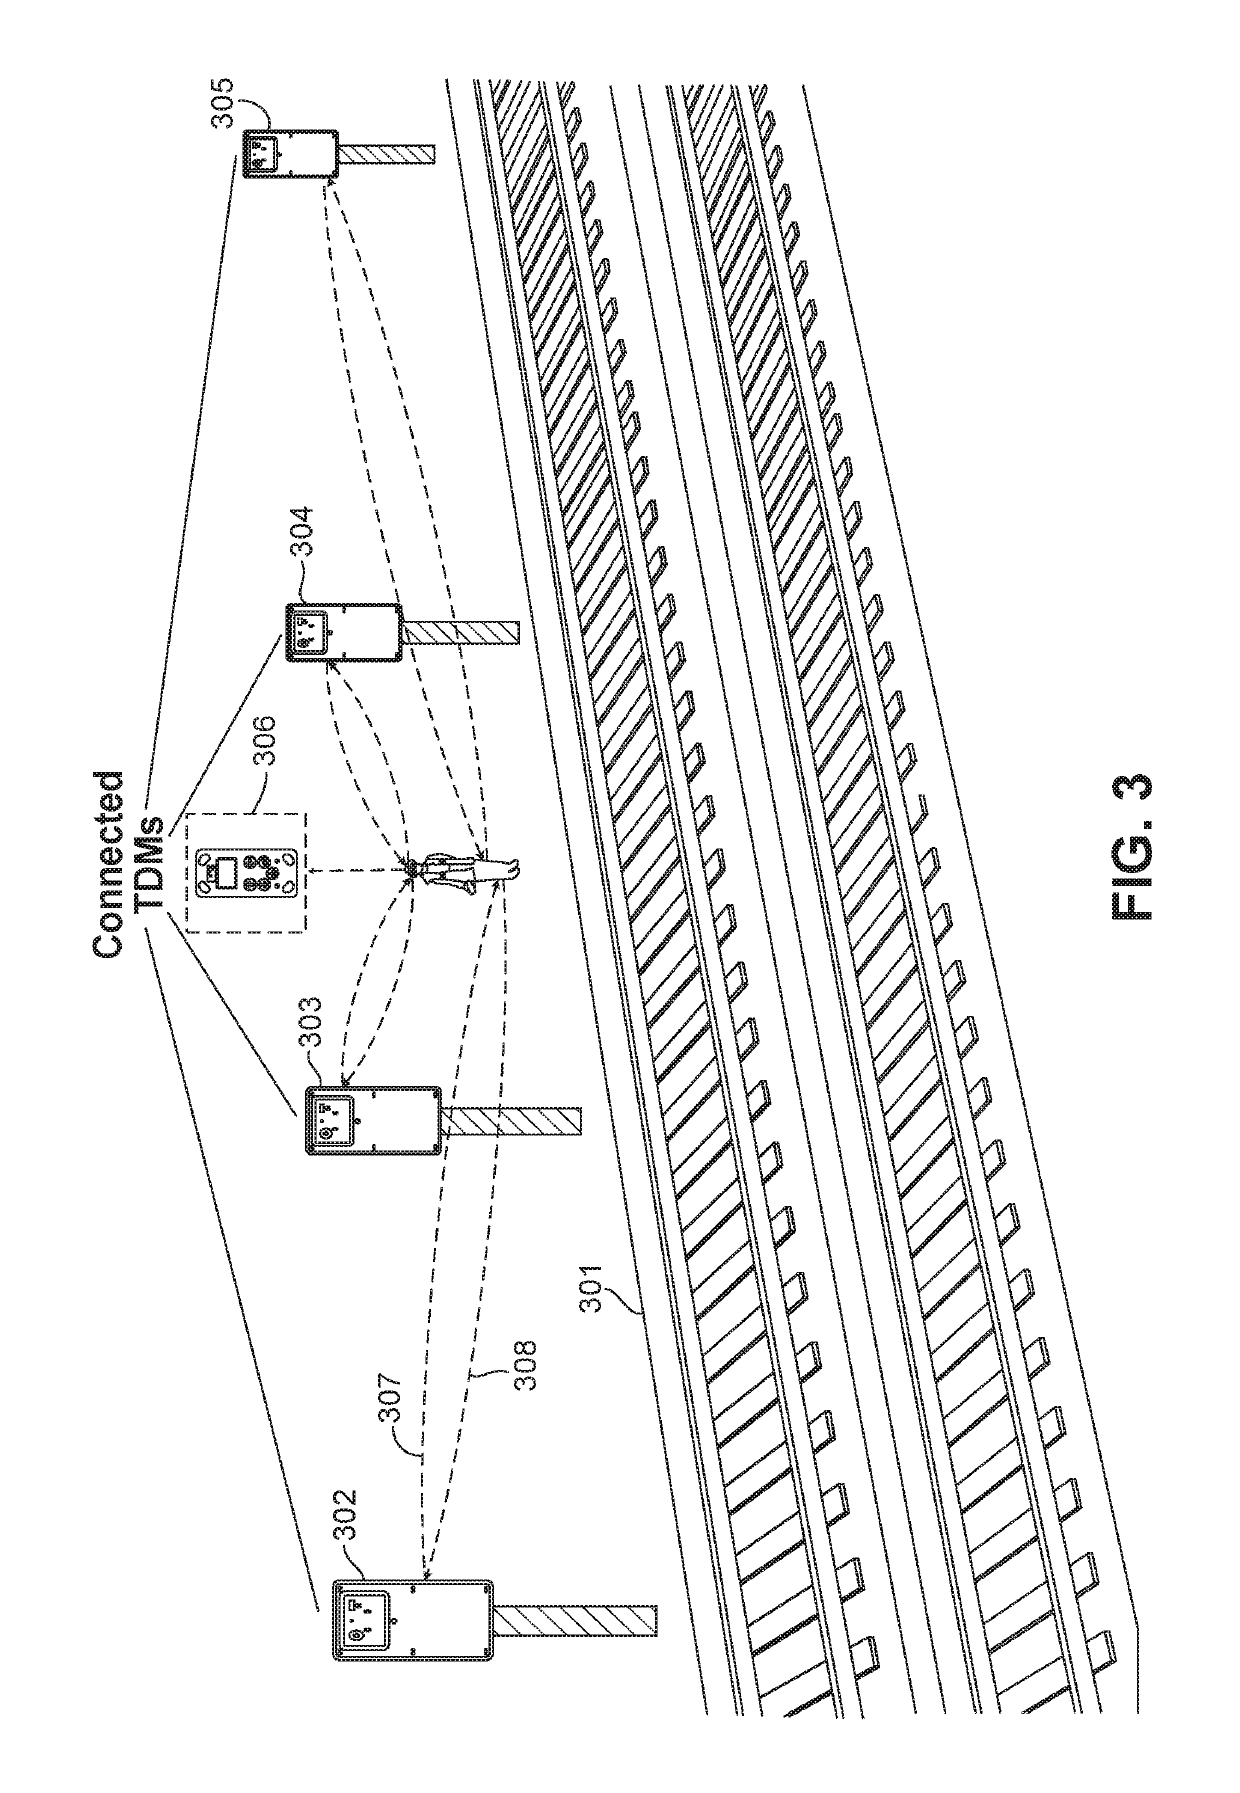 Roadway worker safety system and methods of warning